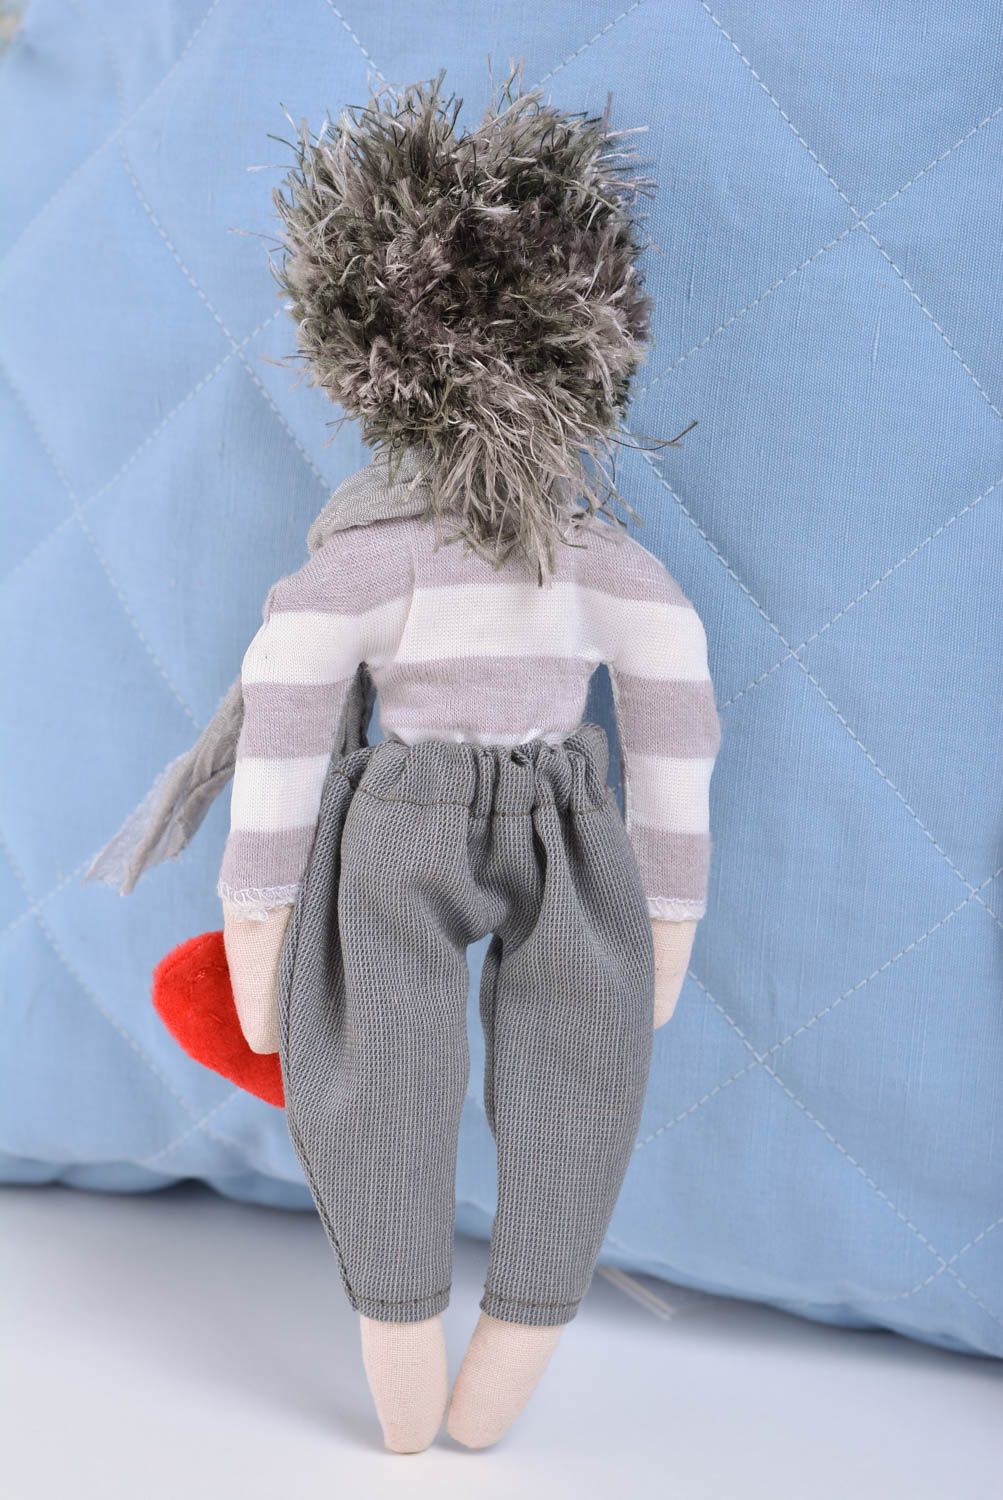 Handmade designer interior fabric soft toy boy with gray scarf and red heart photo 3